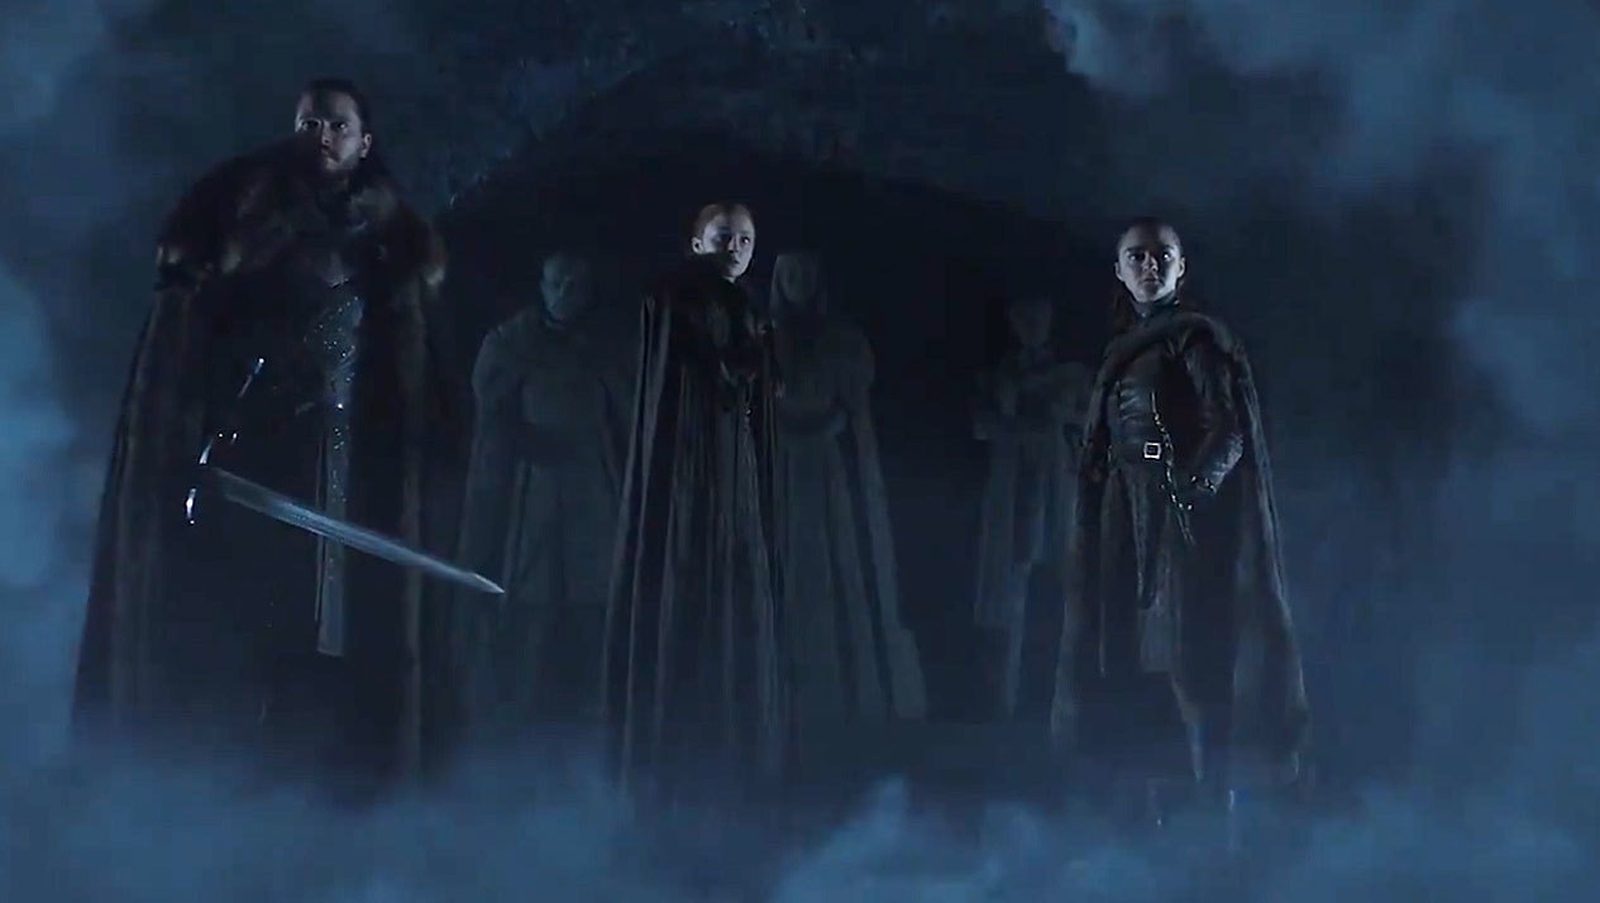 Watch Final Season Trailer For Game Of Thrones